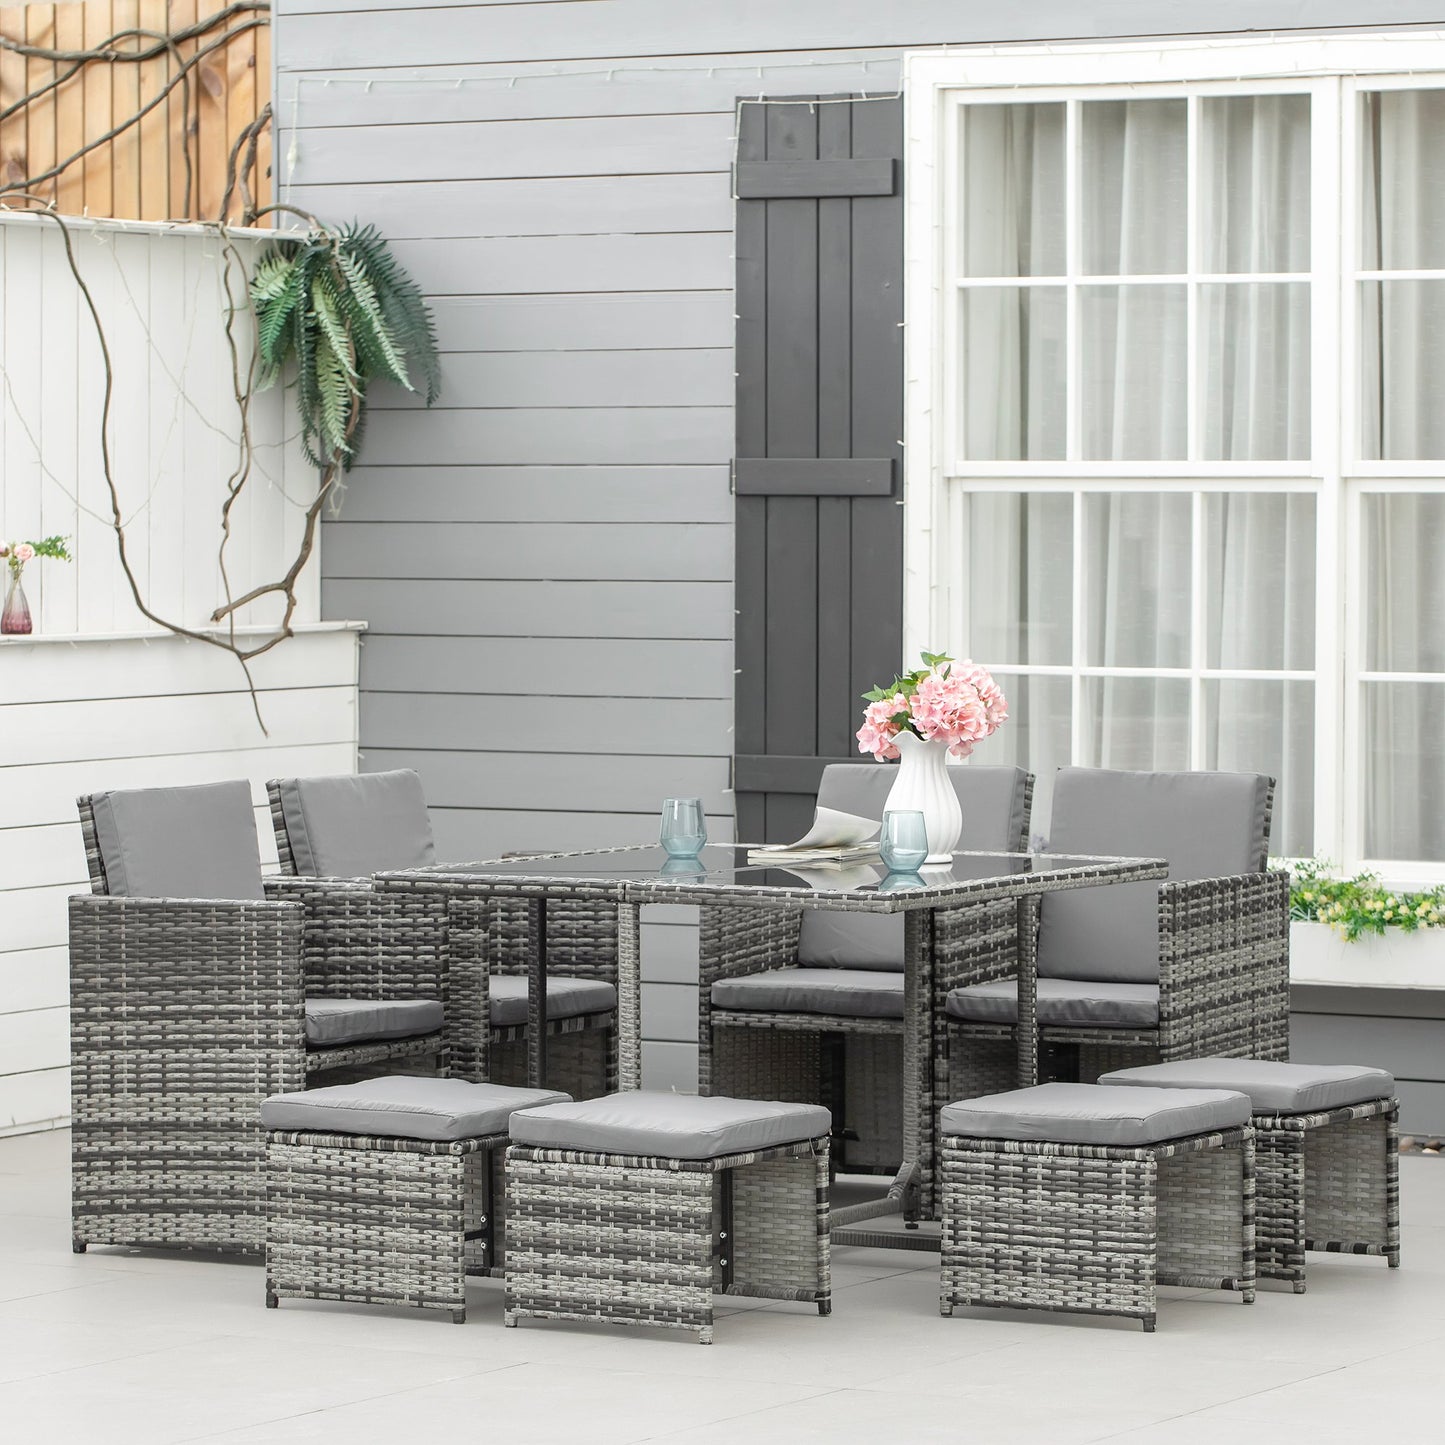 Outsunny Rattan Furniture Set Wicker Weave Patio Dining Table Seat